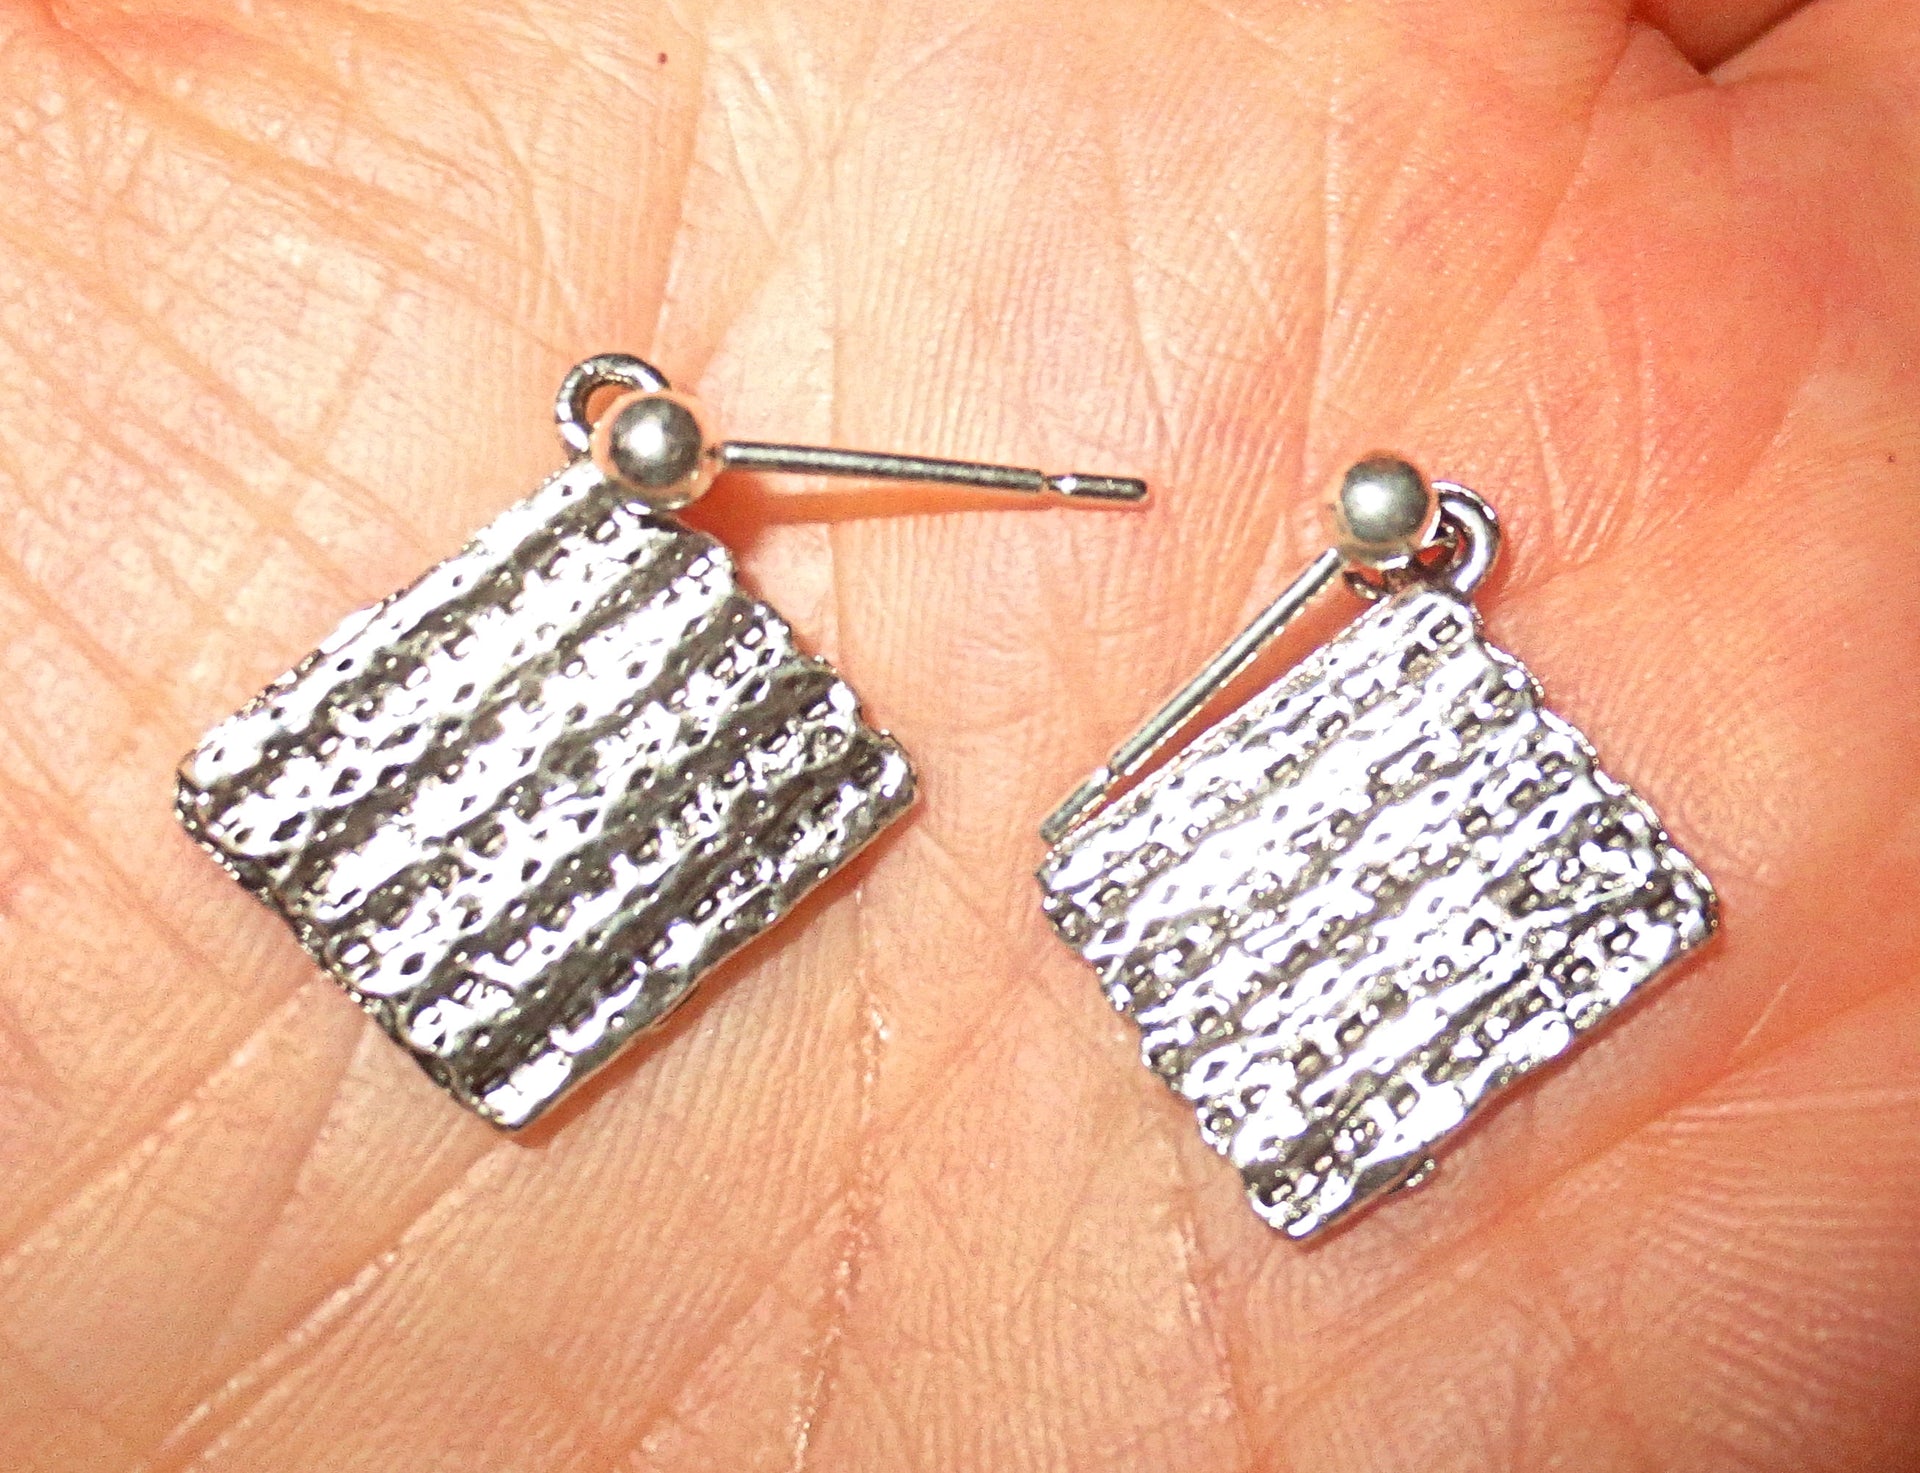 passover theme silver earrings matzo / sterling silver posts